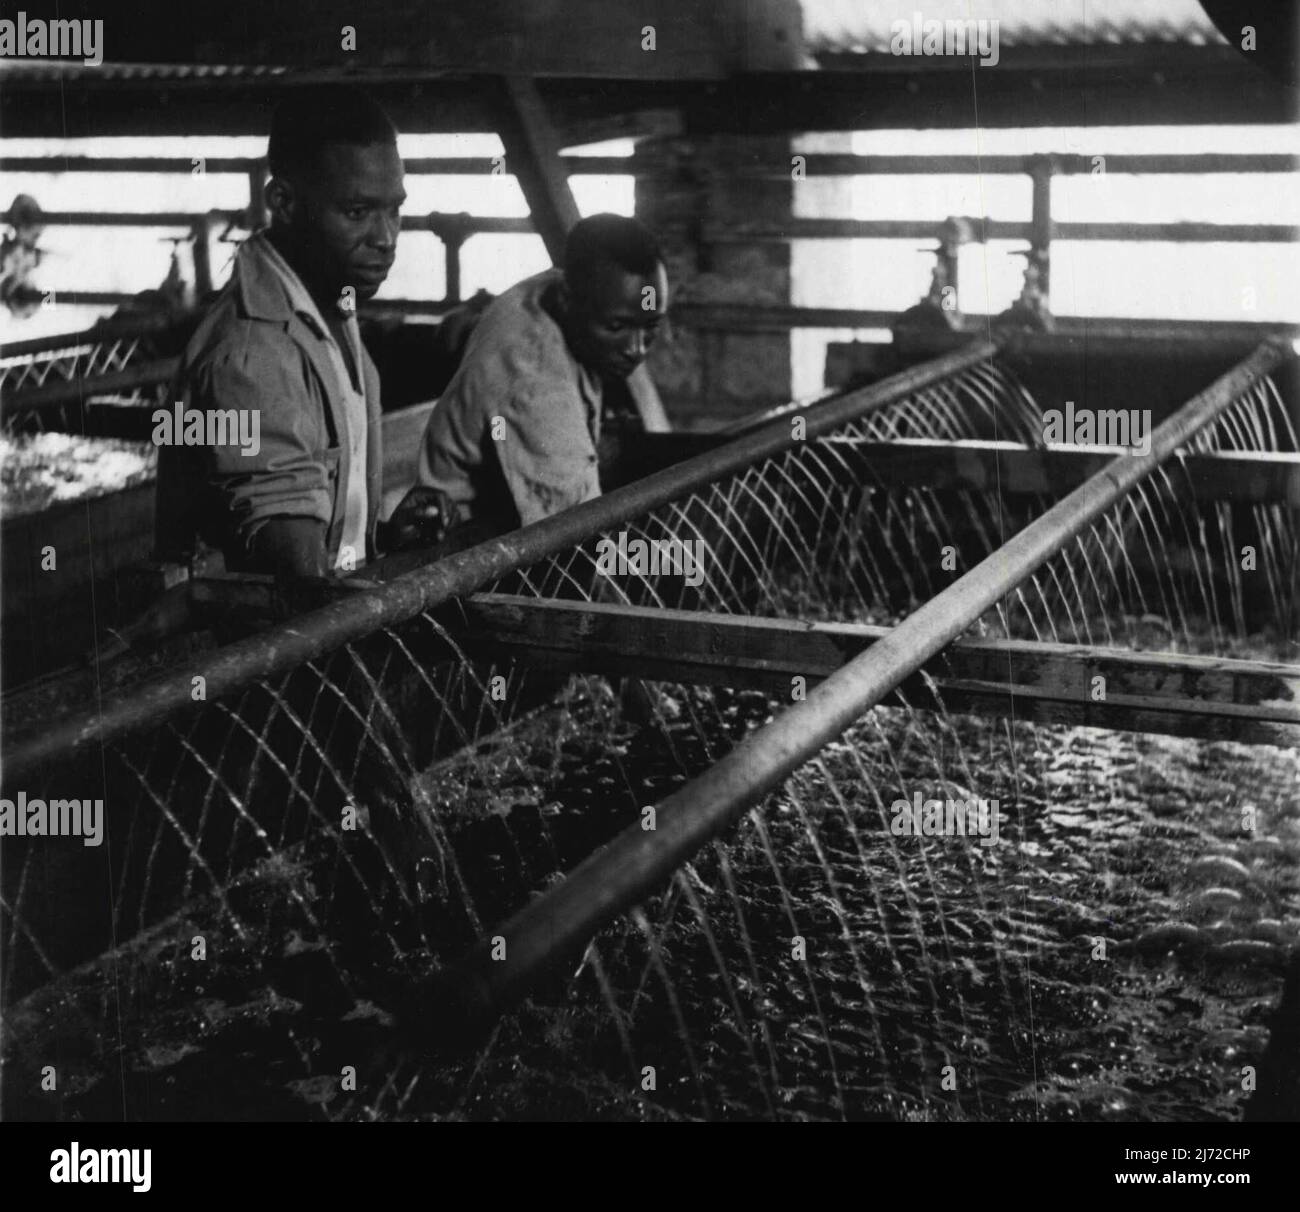 Fiber Board Factory - Washing the pulp produced from the autoclave. One of a series taken at the East African Industrial Management Board's Fibre Board factory at Thika. September 13, 1951. (Photo by British Official Photograph). Stock Photo